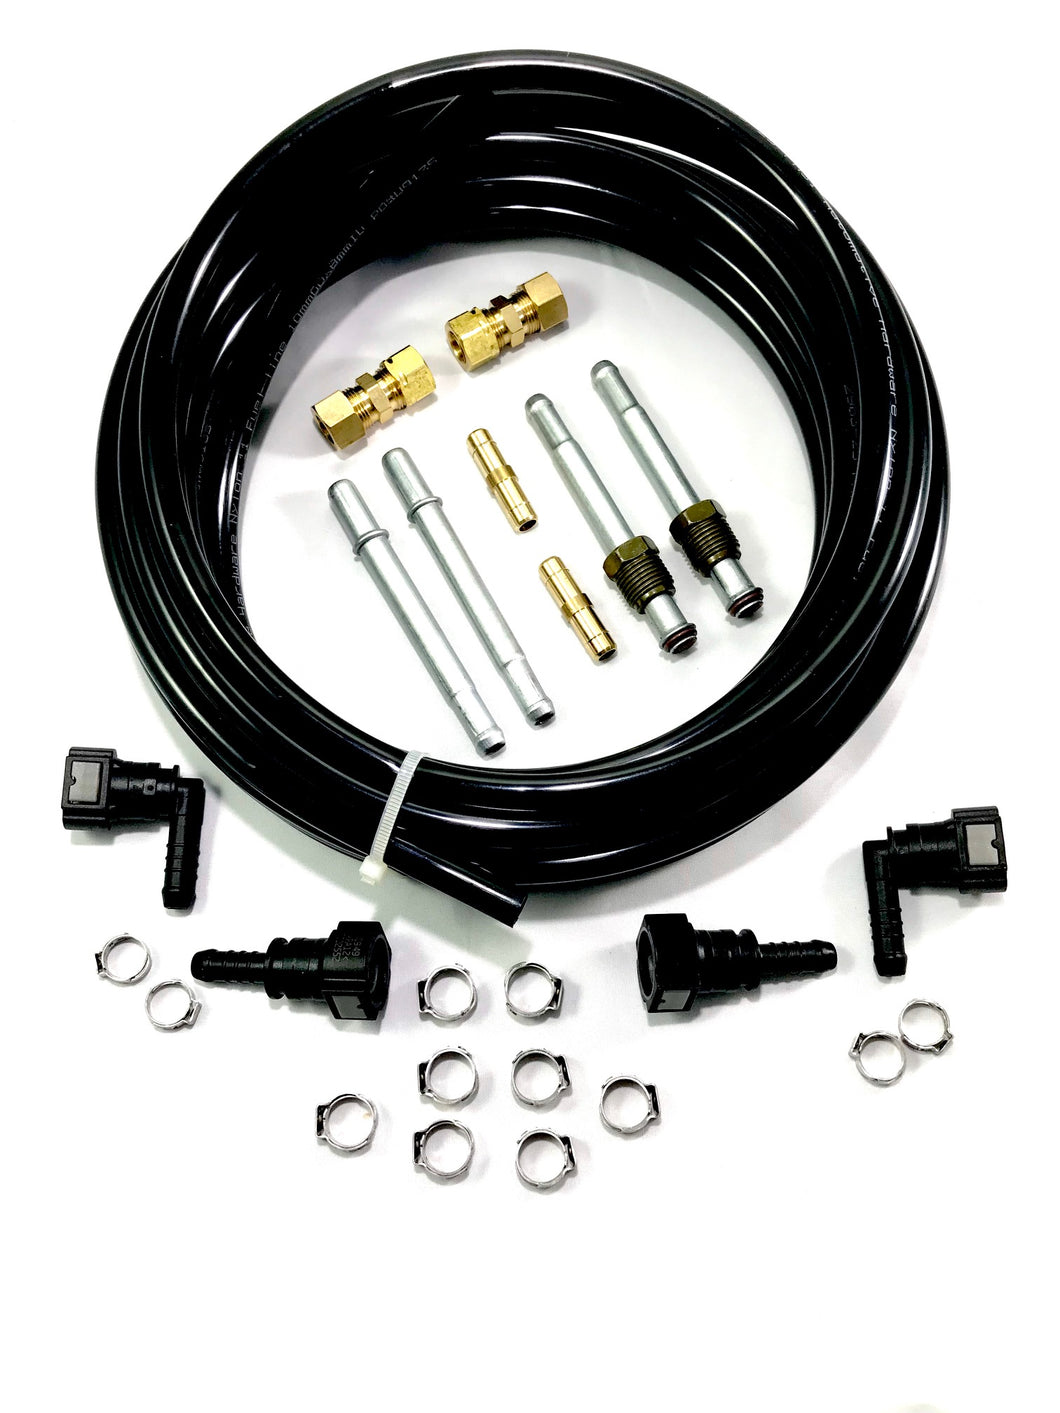 Replace any 3/8 Steel Fuel Line. Fittings / Tubing / Compression